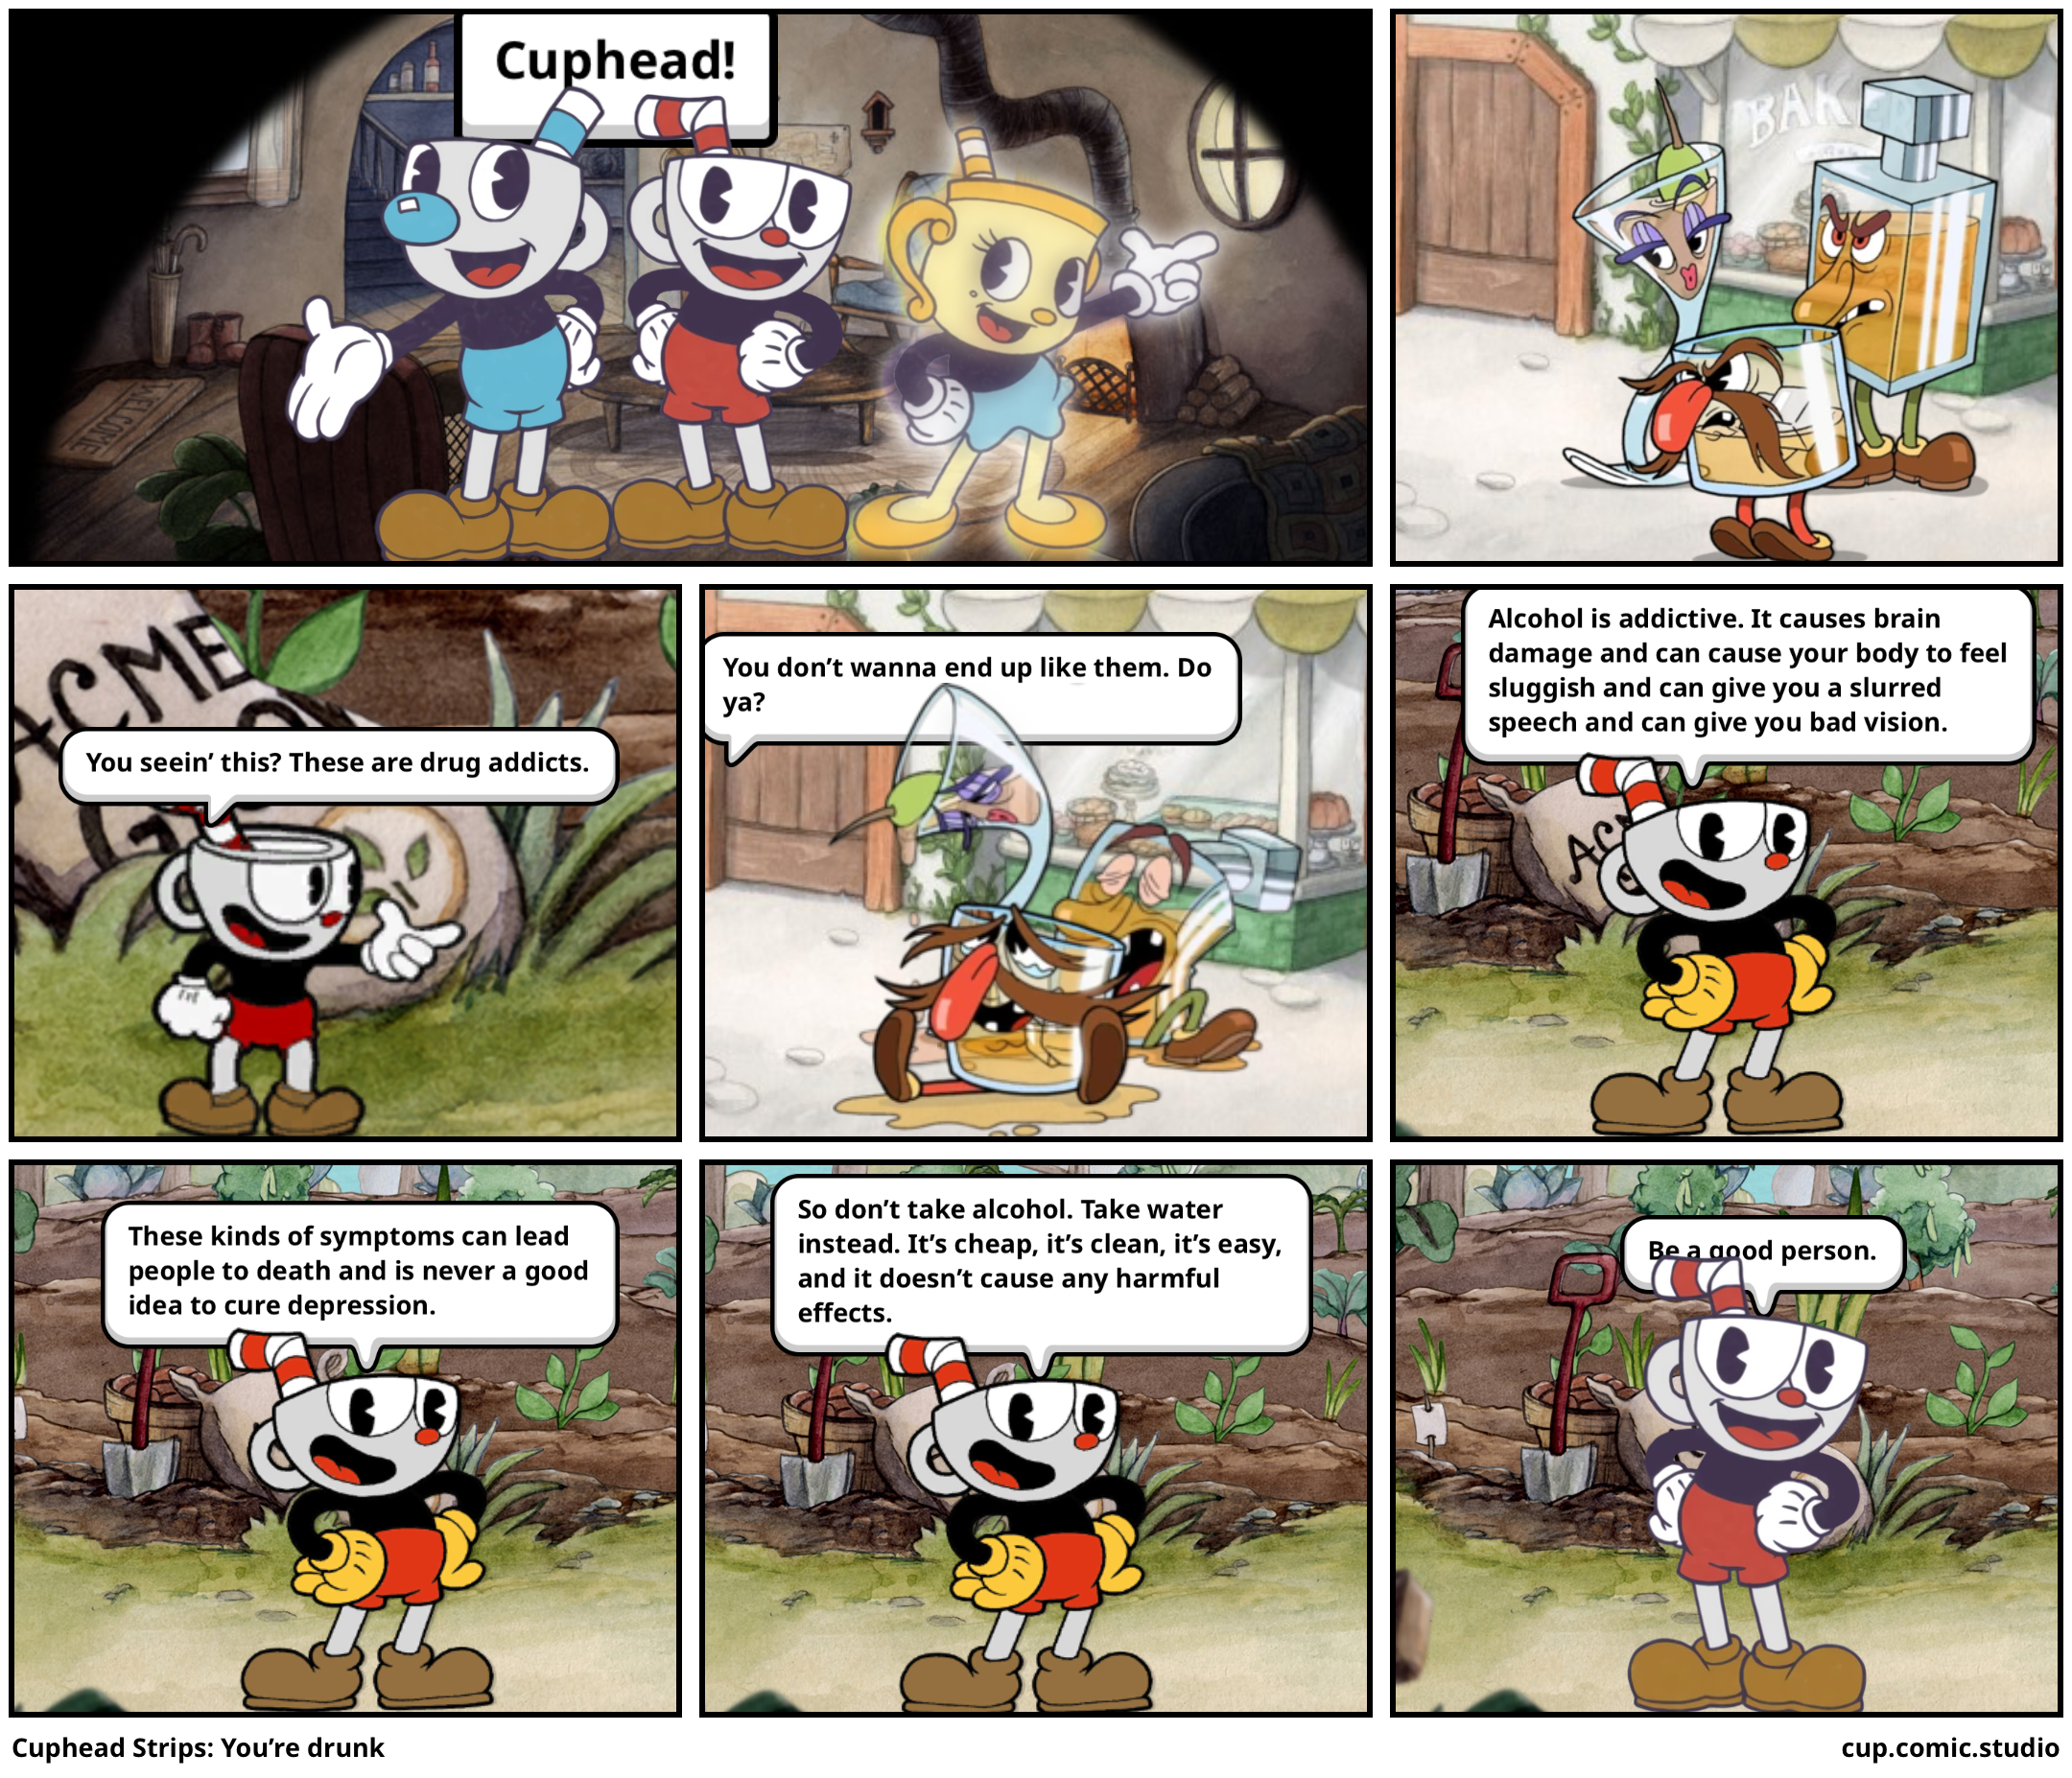 Cuphead Strips: You’re drunk